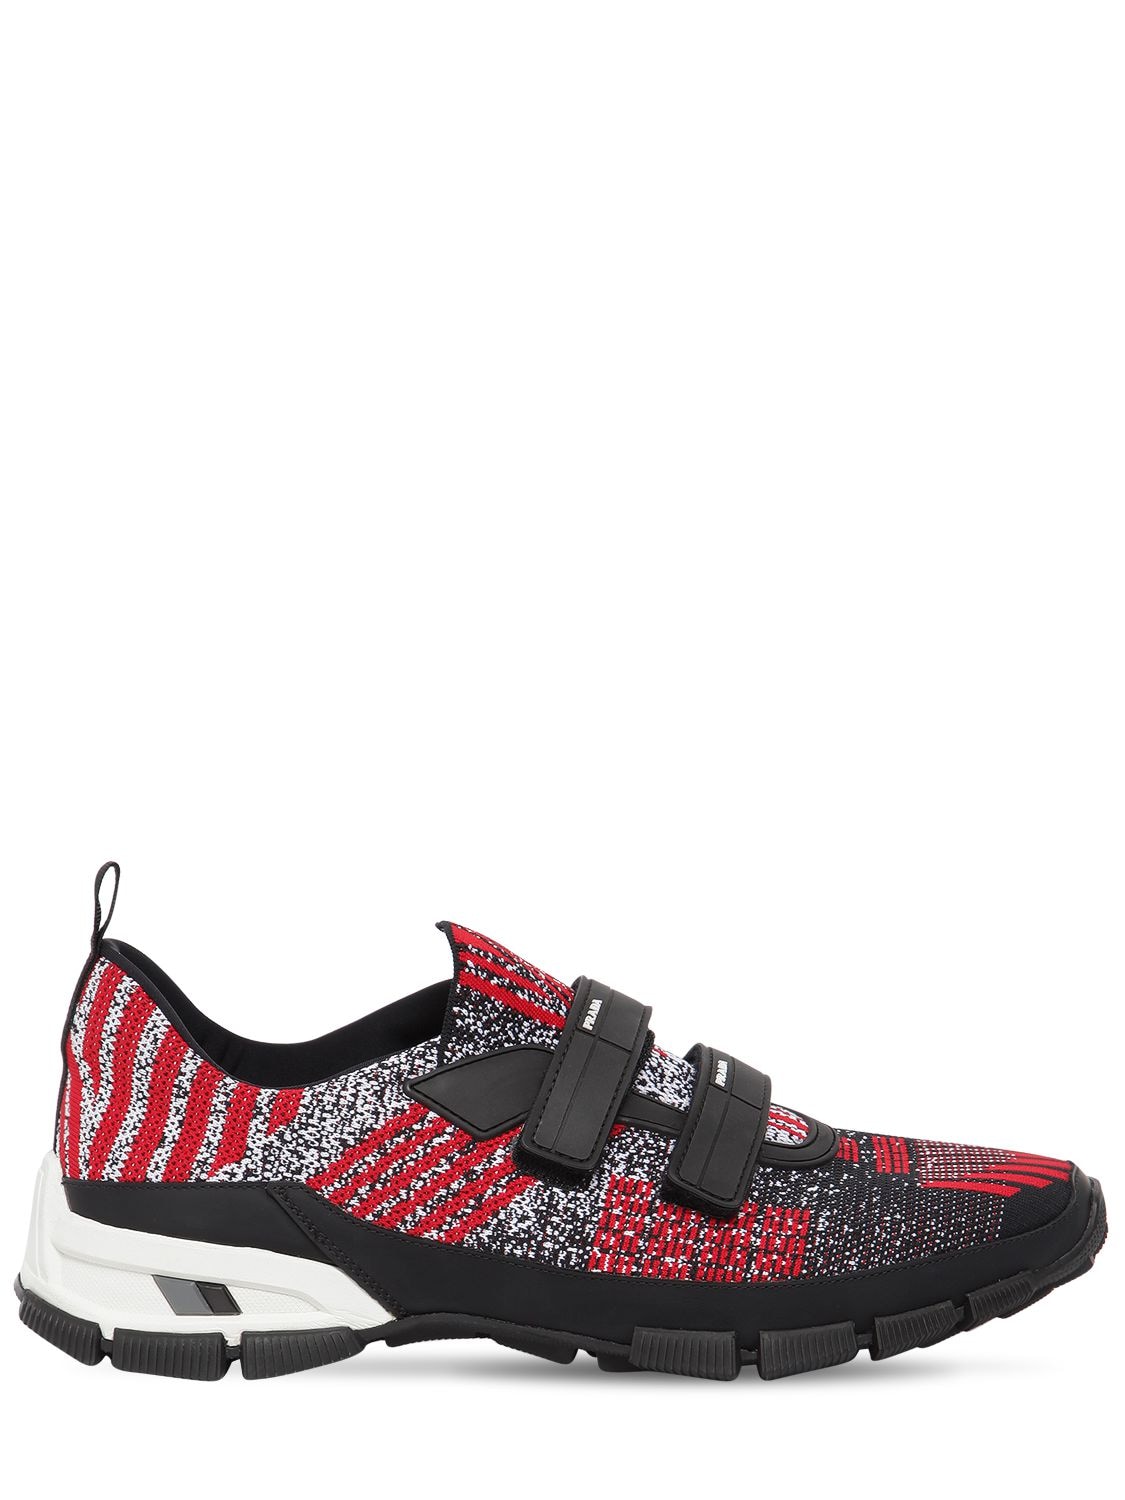 Prada Crossection Knit Black And Red 